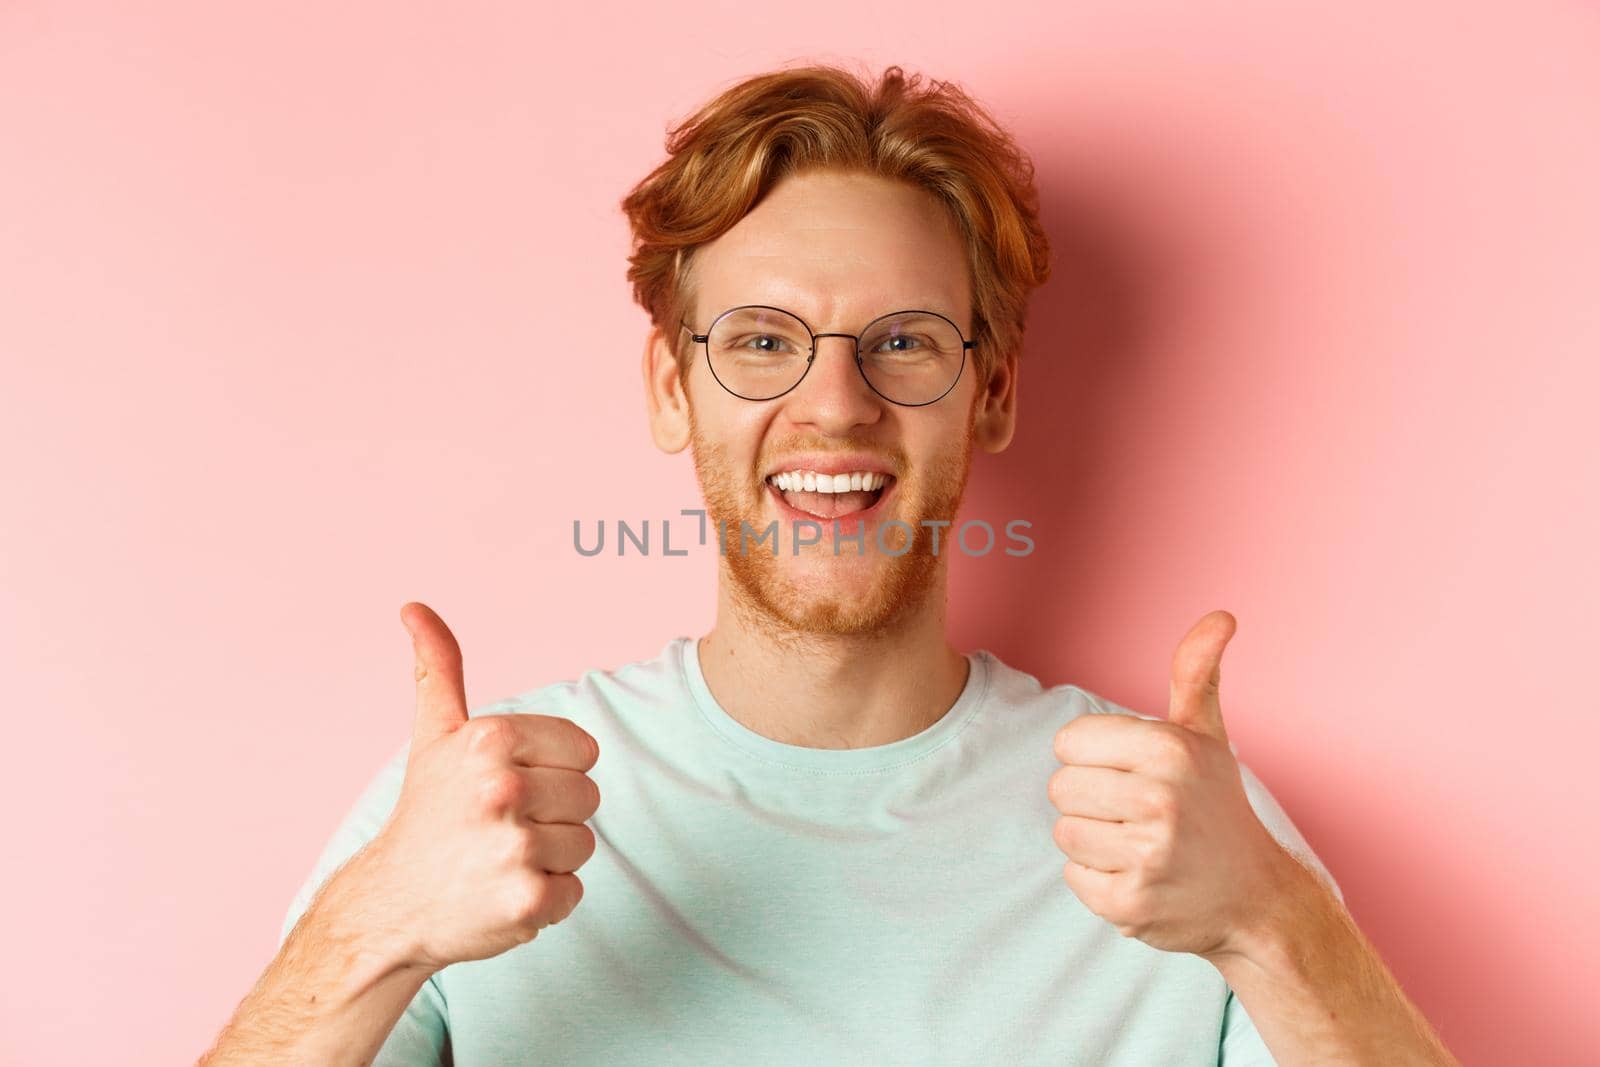 Face of satisfied male customer showing thumbs-up in approval, smiling happy, wearing glasses and t-shirt, pink background.